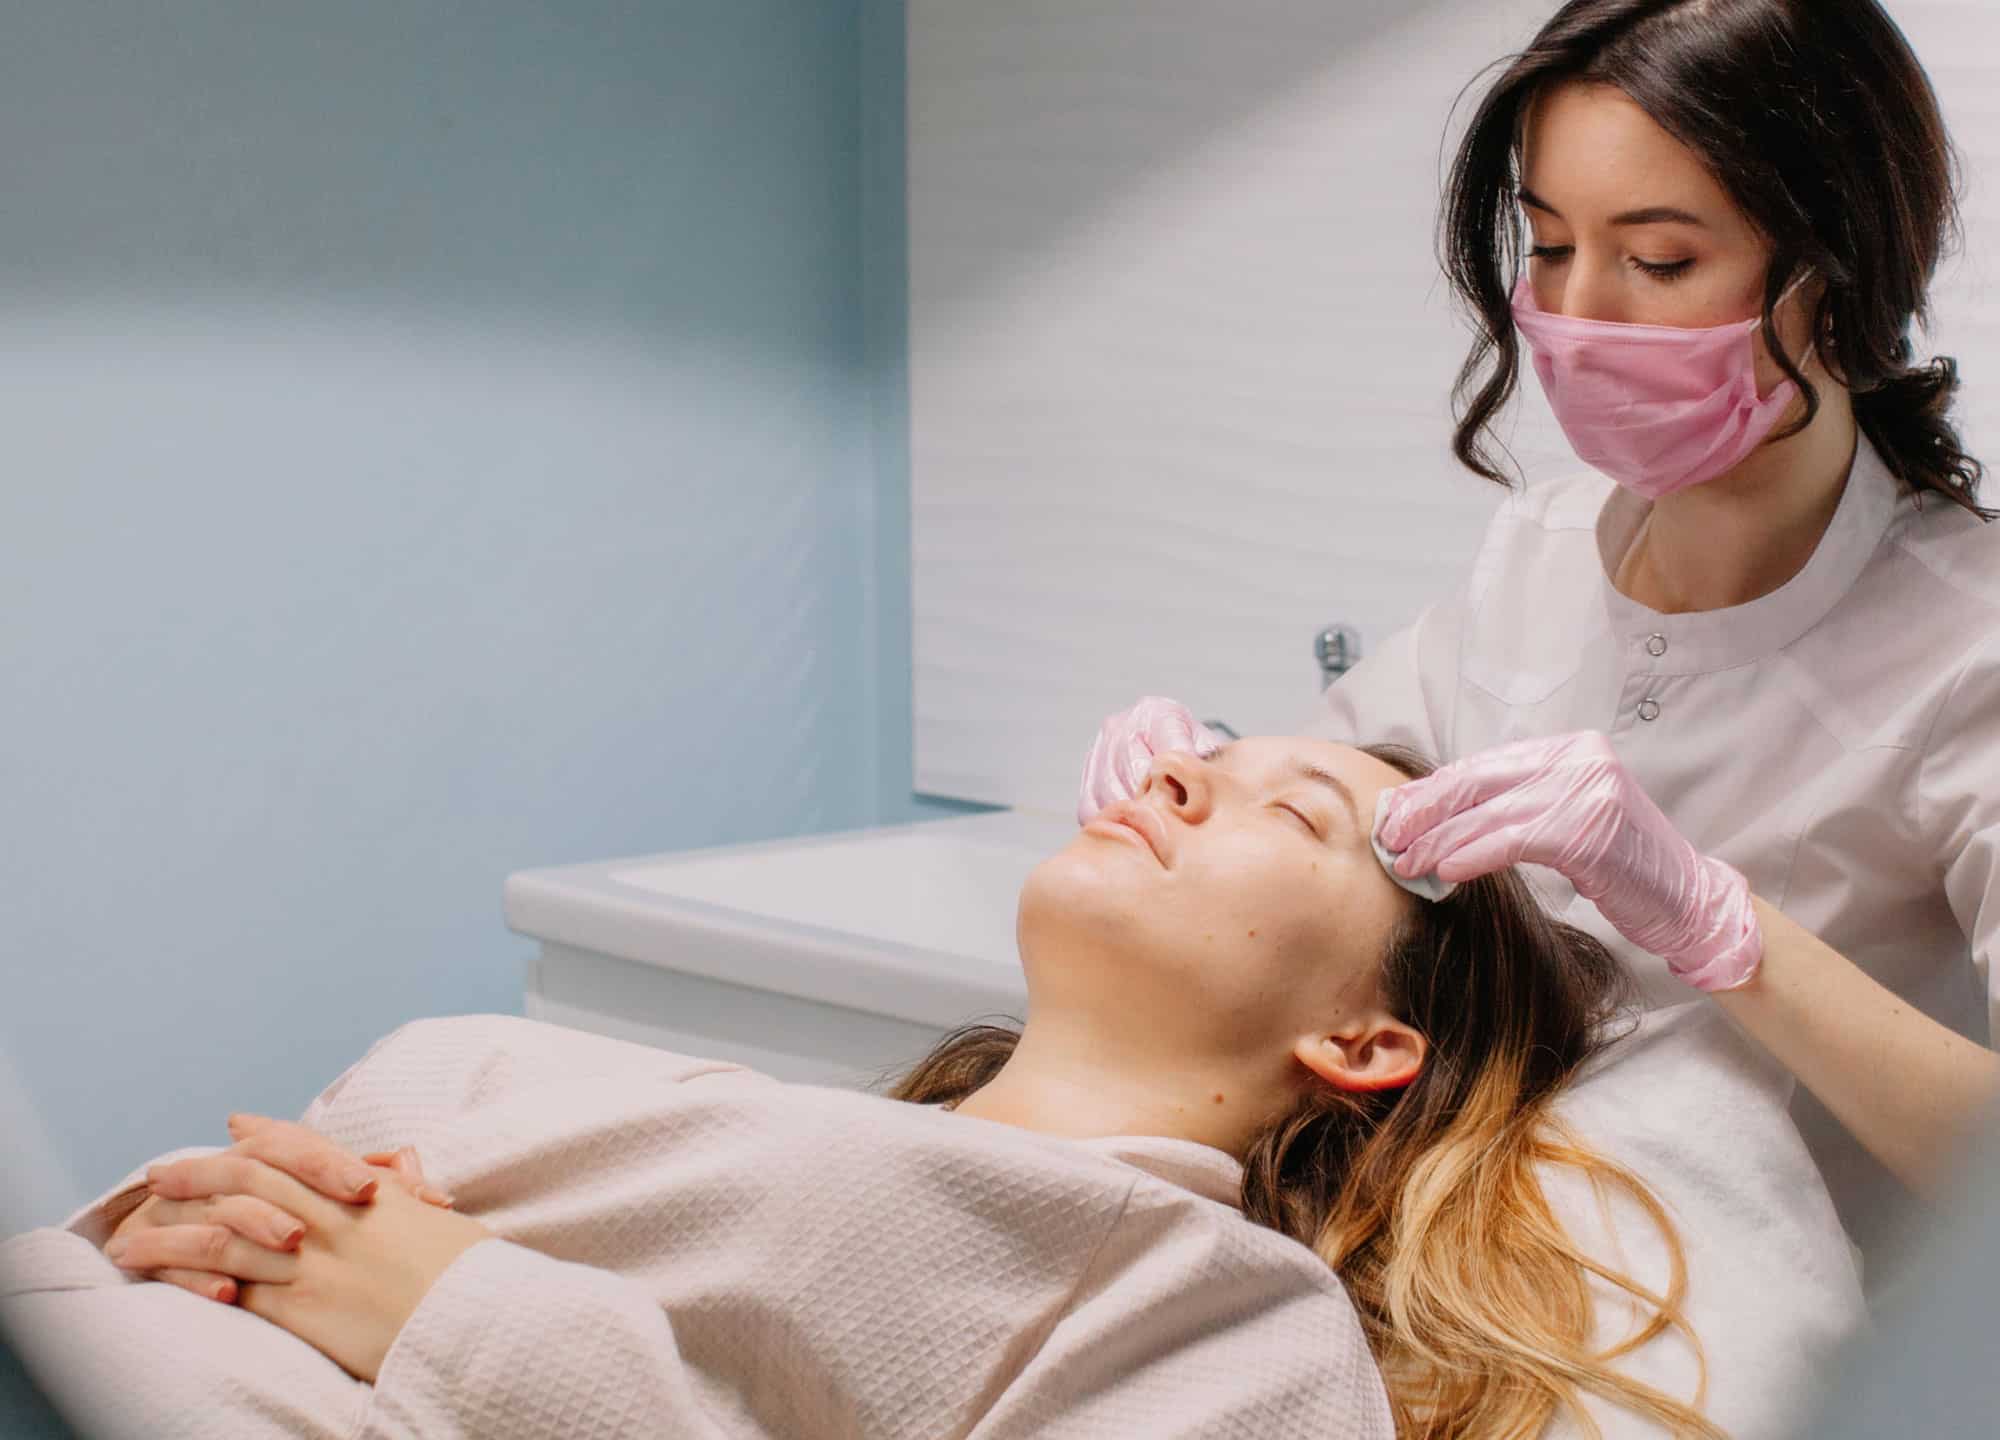 Wondering what type of chemical peel you should get? Learn more about the most common in-office chemical peels and which is right for your skin.